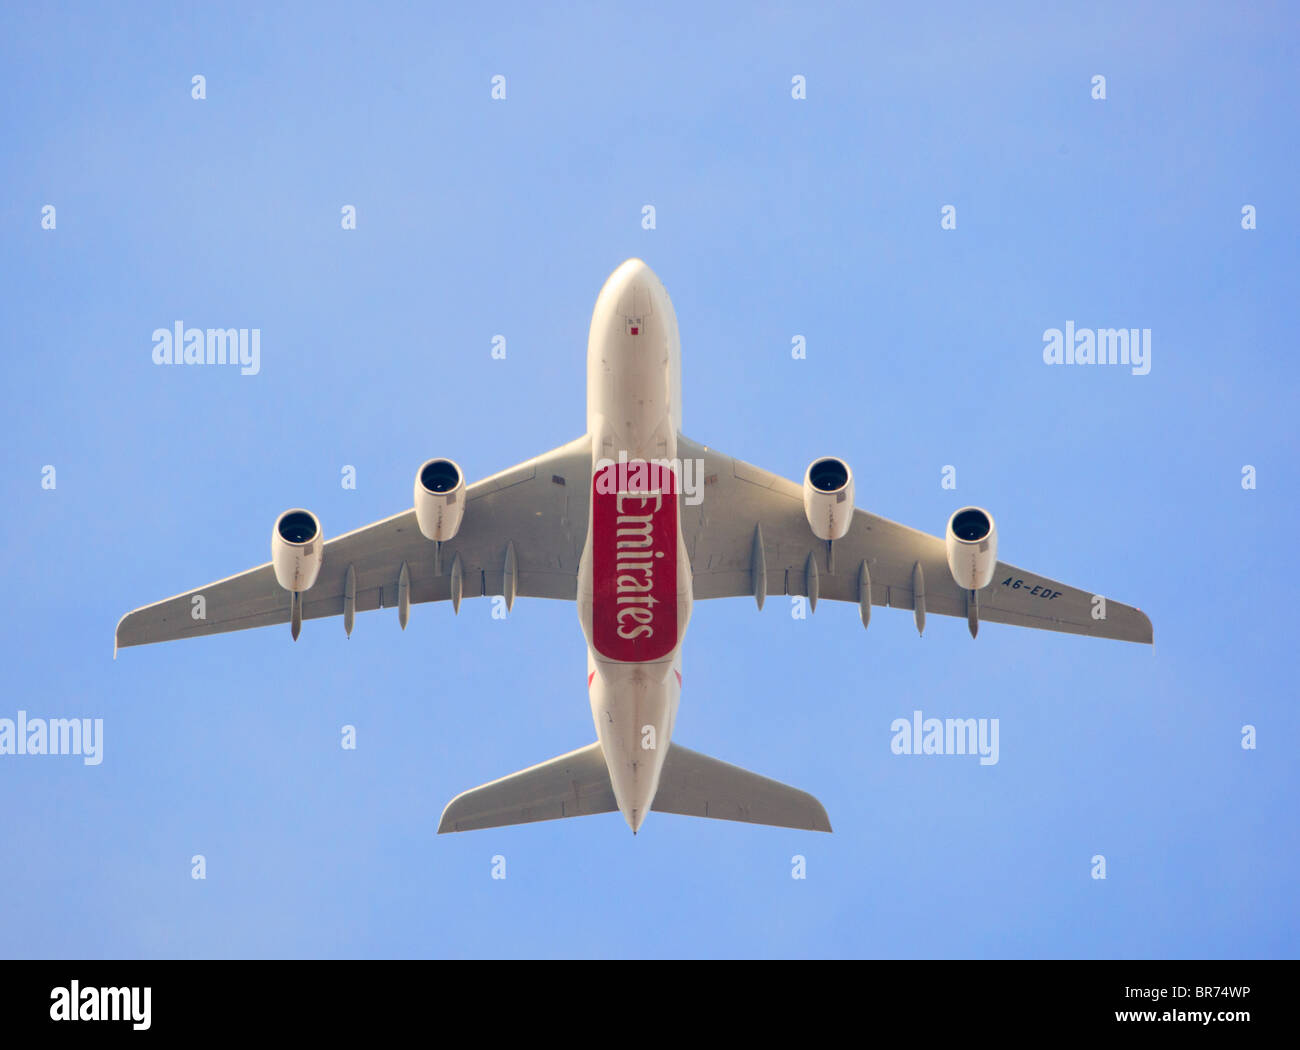 Emirates Airlines Airbus A380 flying overhead against a blue sky Stock Photo